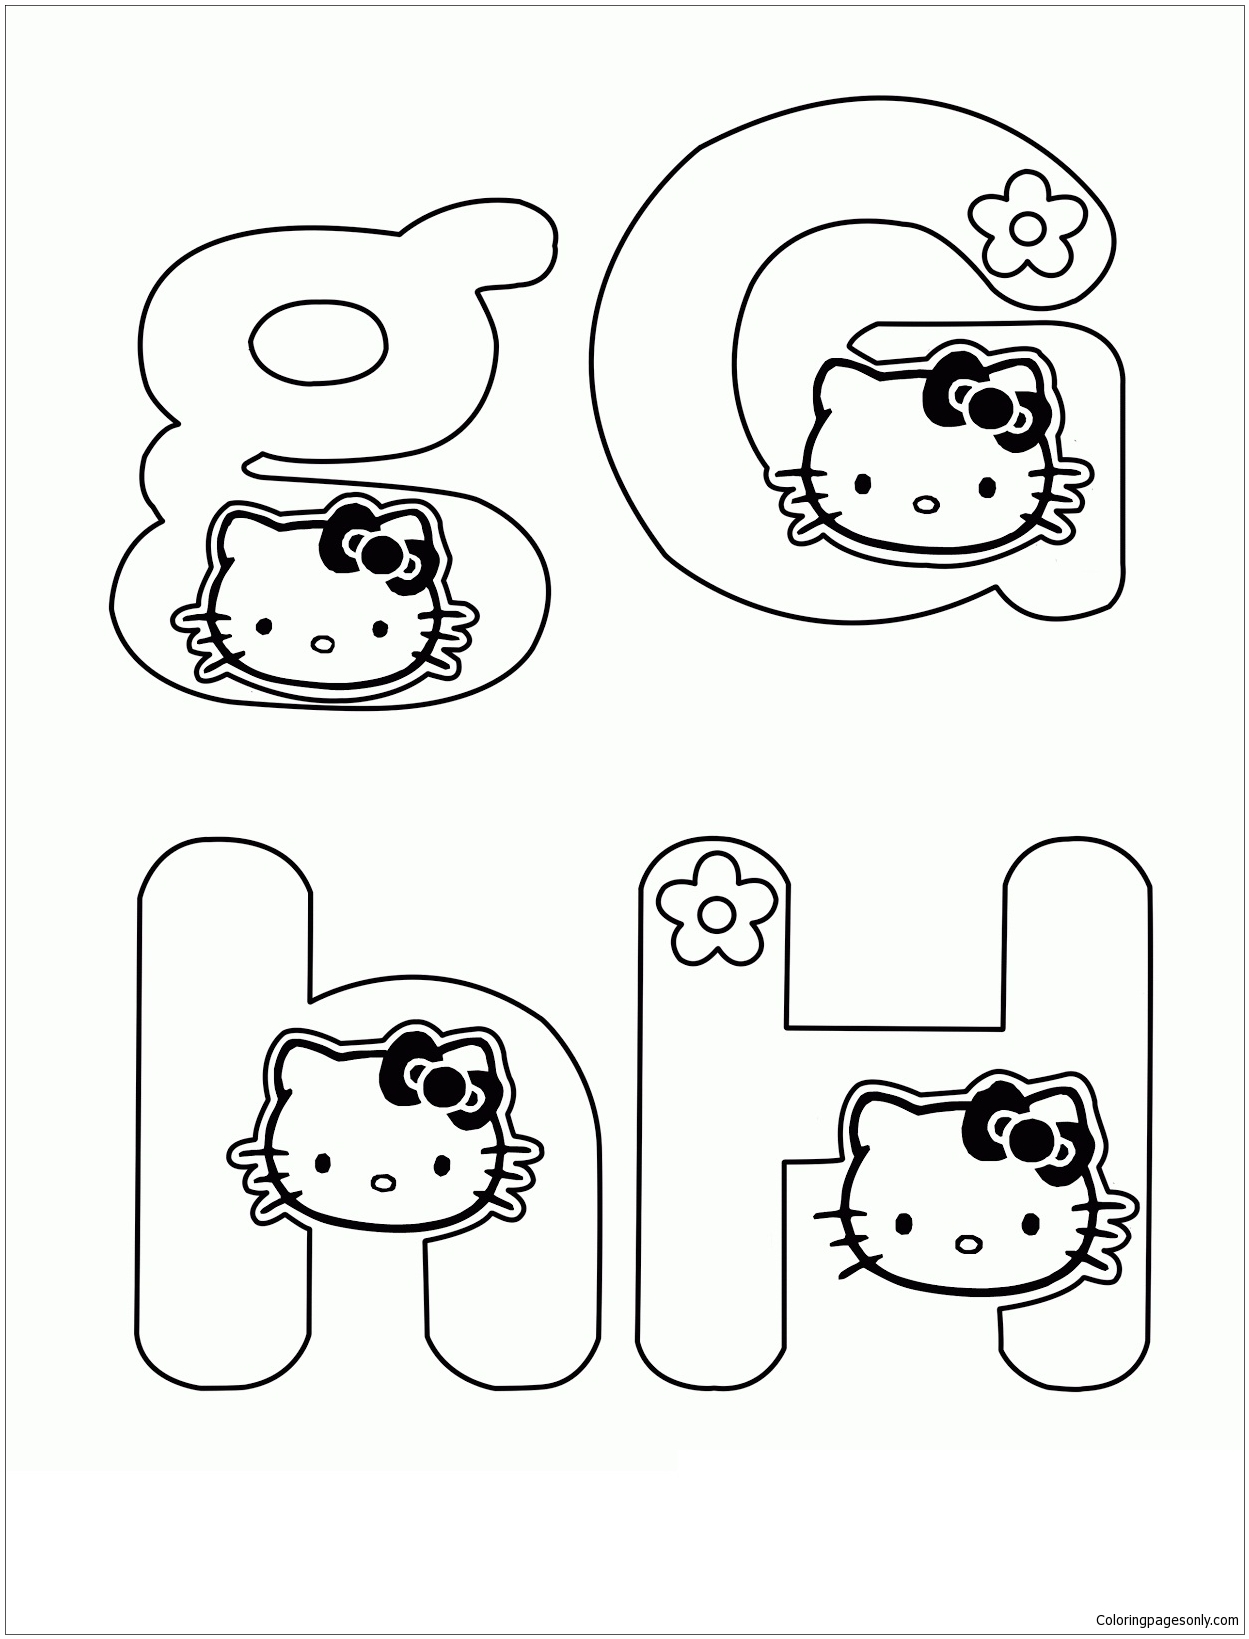 Download Hello Kitty With Two Letter G and H Coloring Page - Free Coloring Pages Online